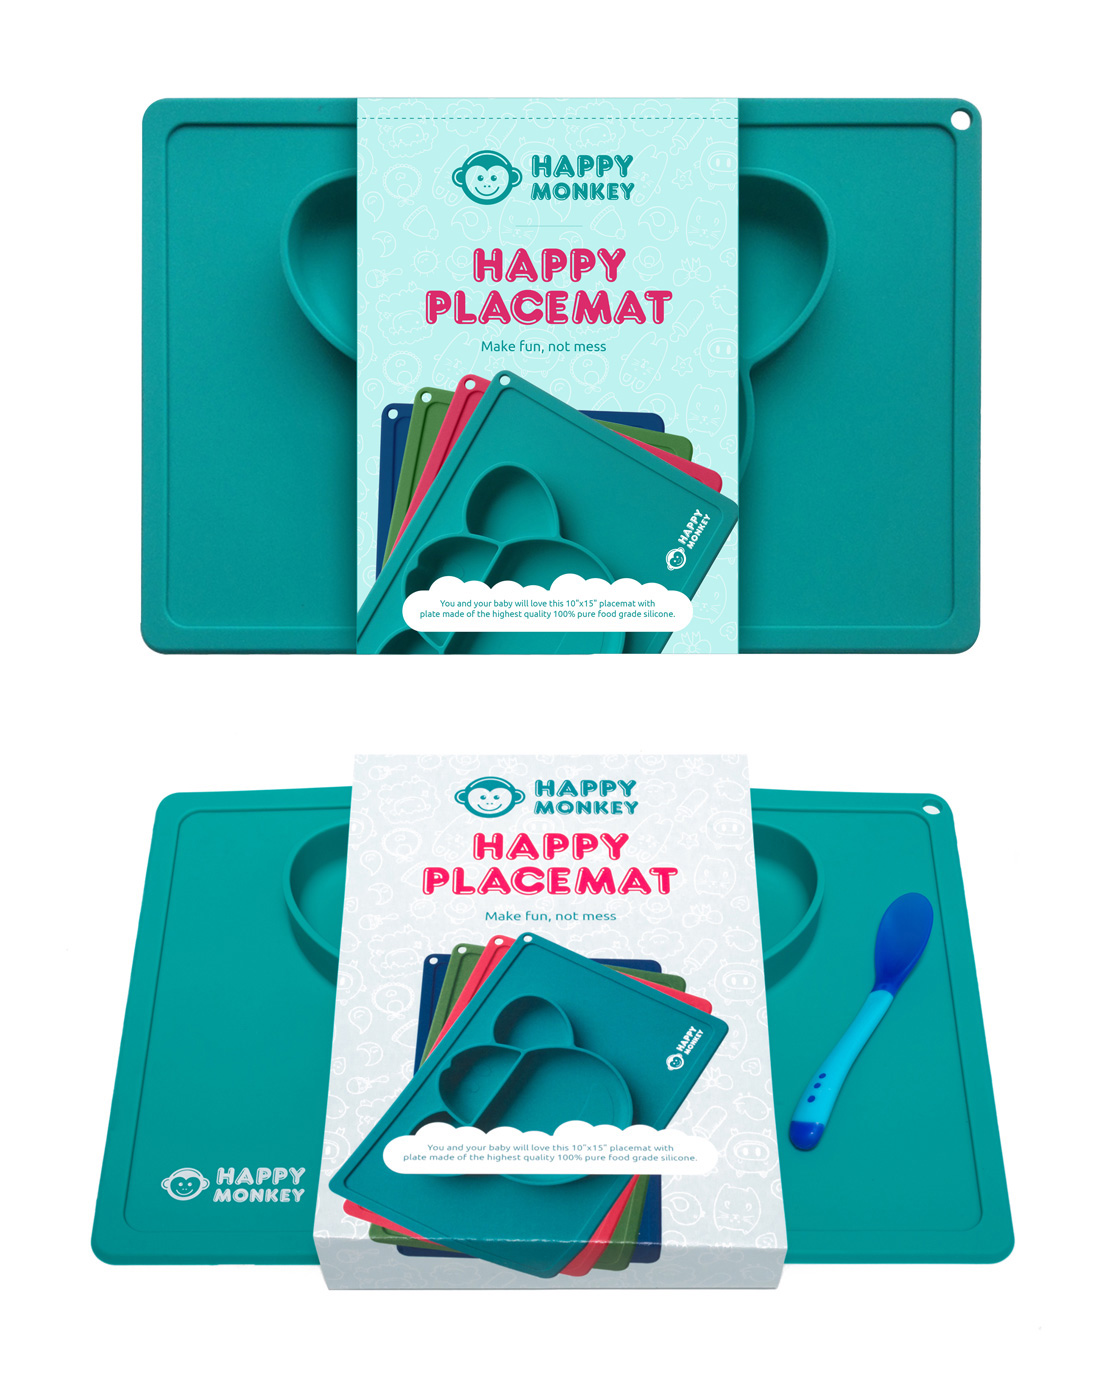 Happy Placemat package design